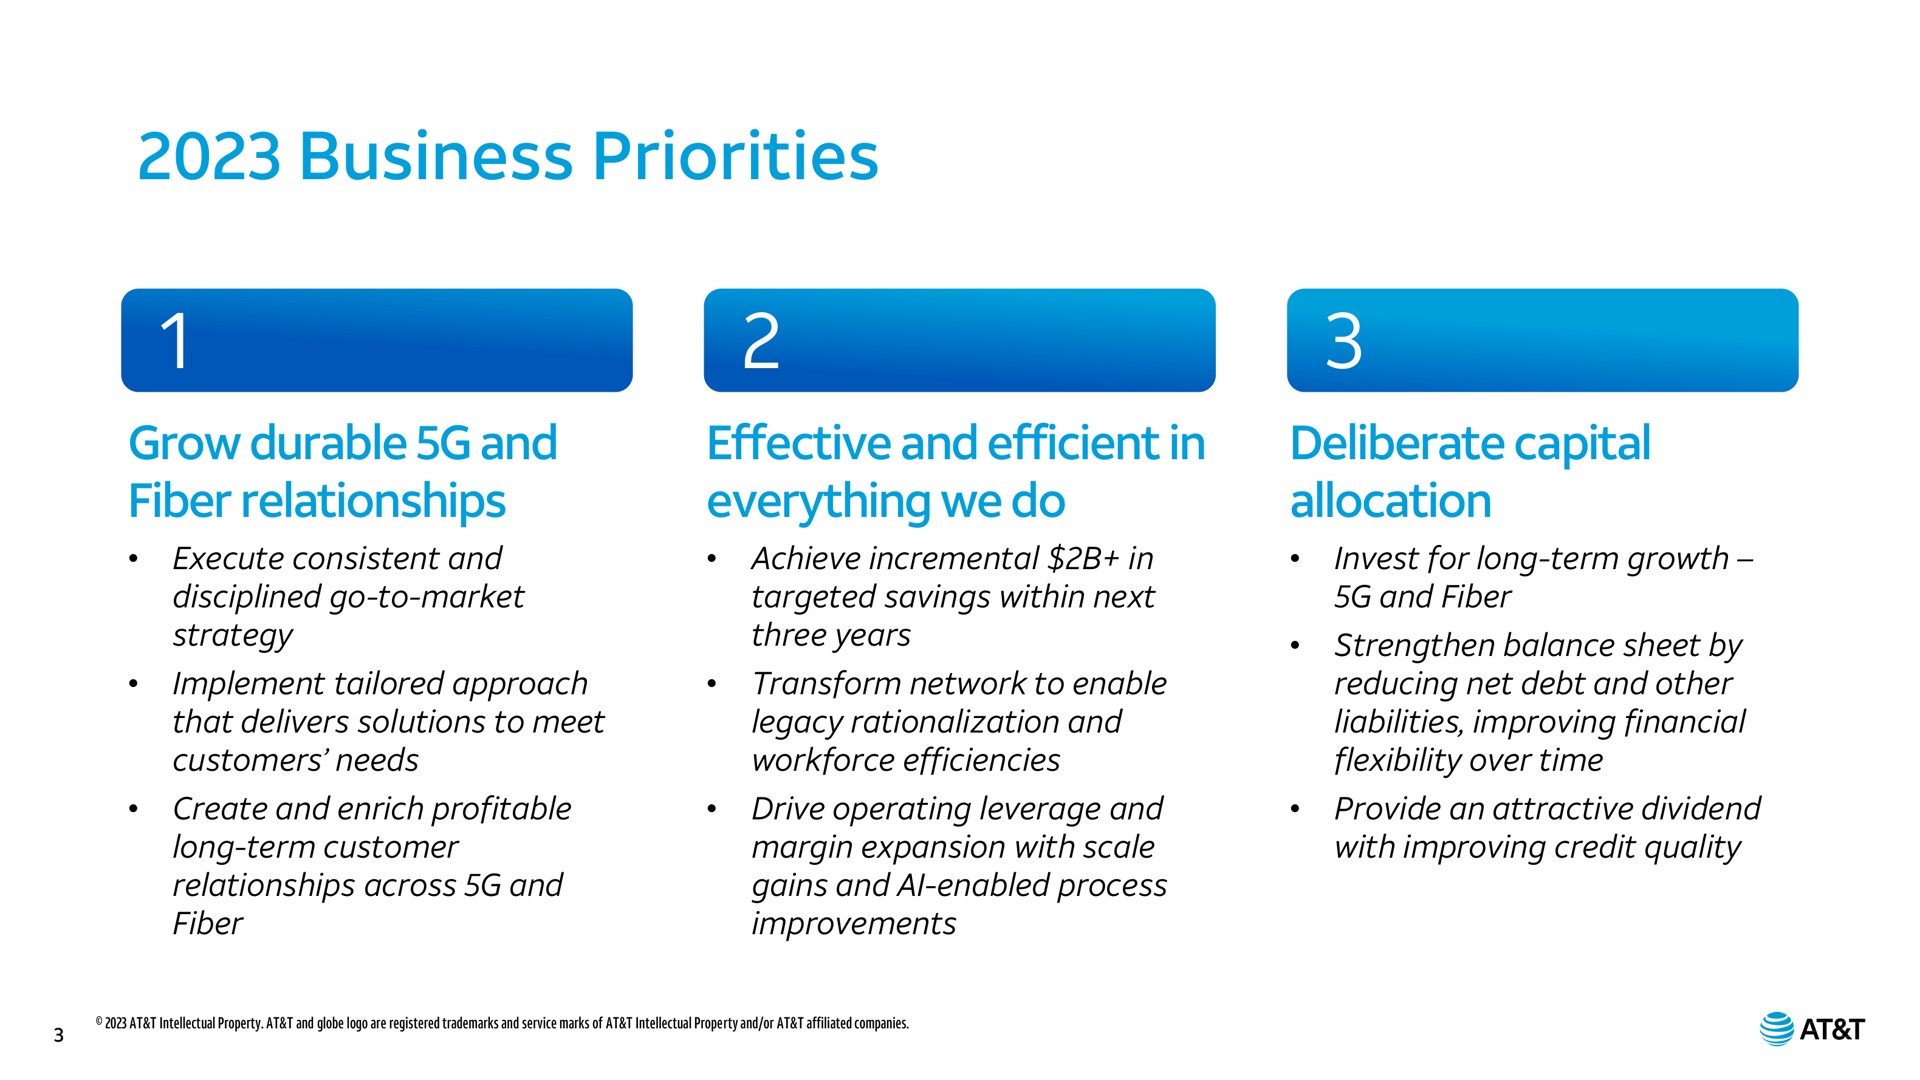 business priorities grow durable and fiber relationships effective and efficient in everything we do deliberate capital allocation | AT&T